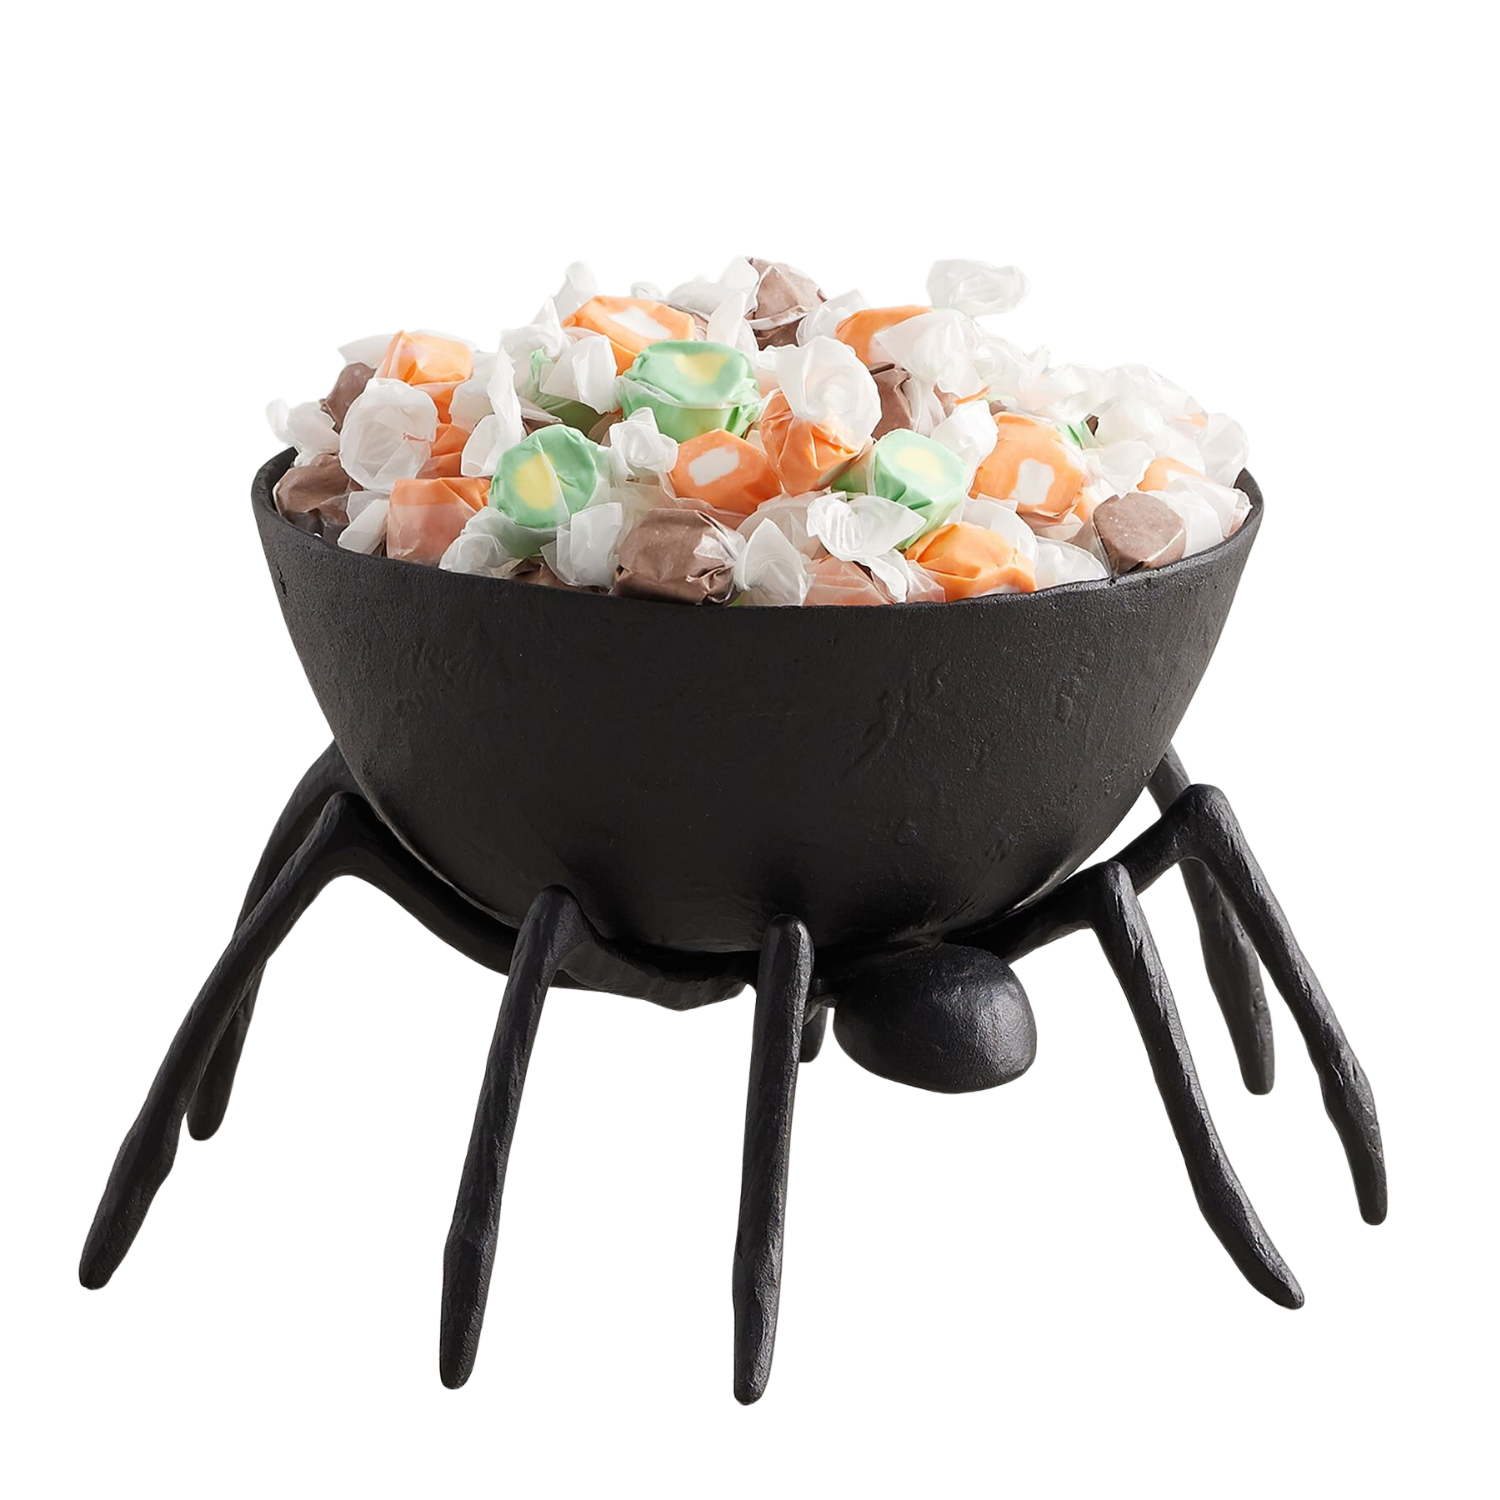 Metal Spider Candy Bowl